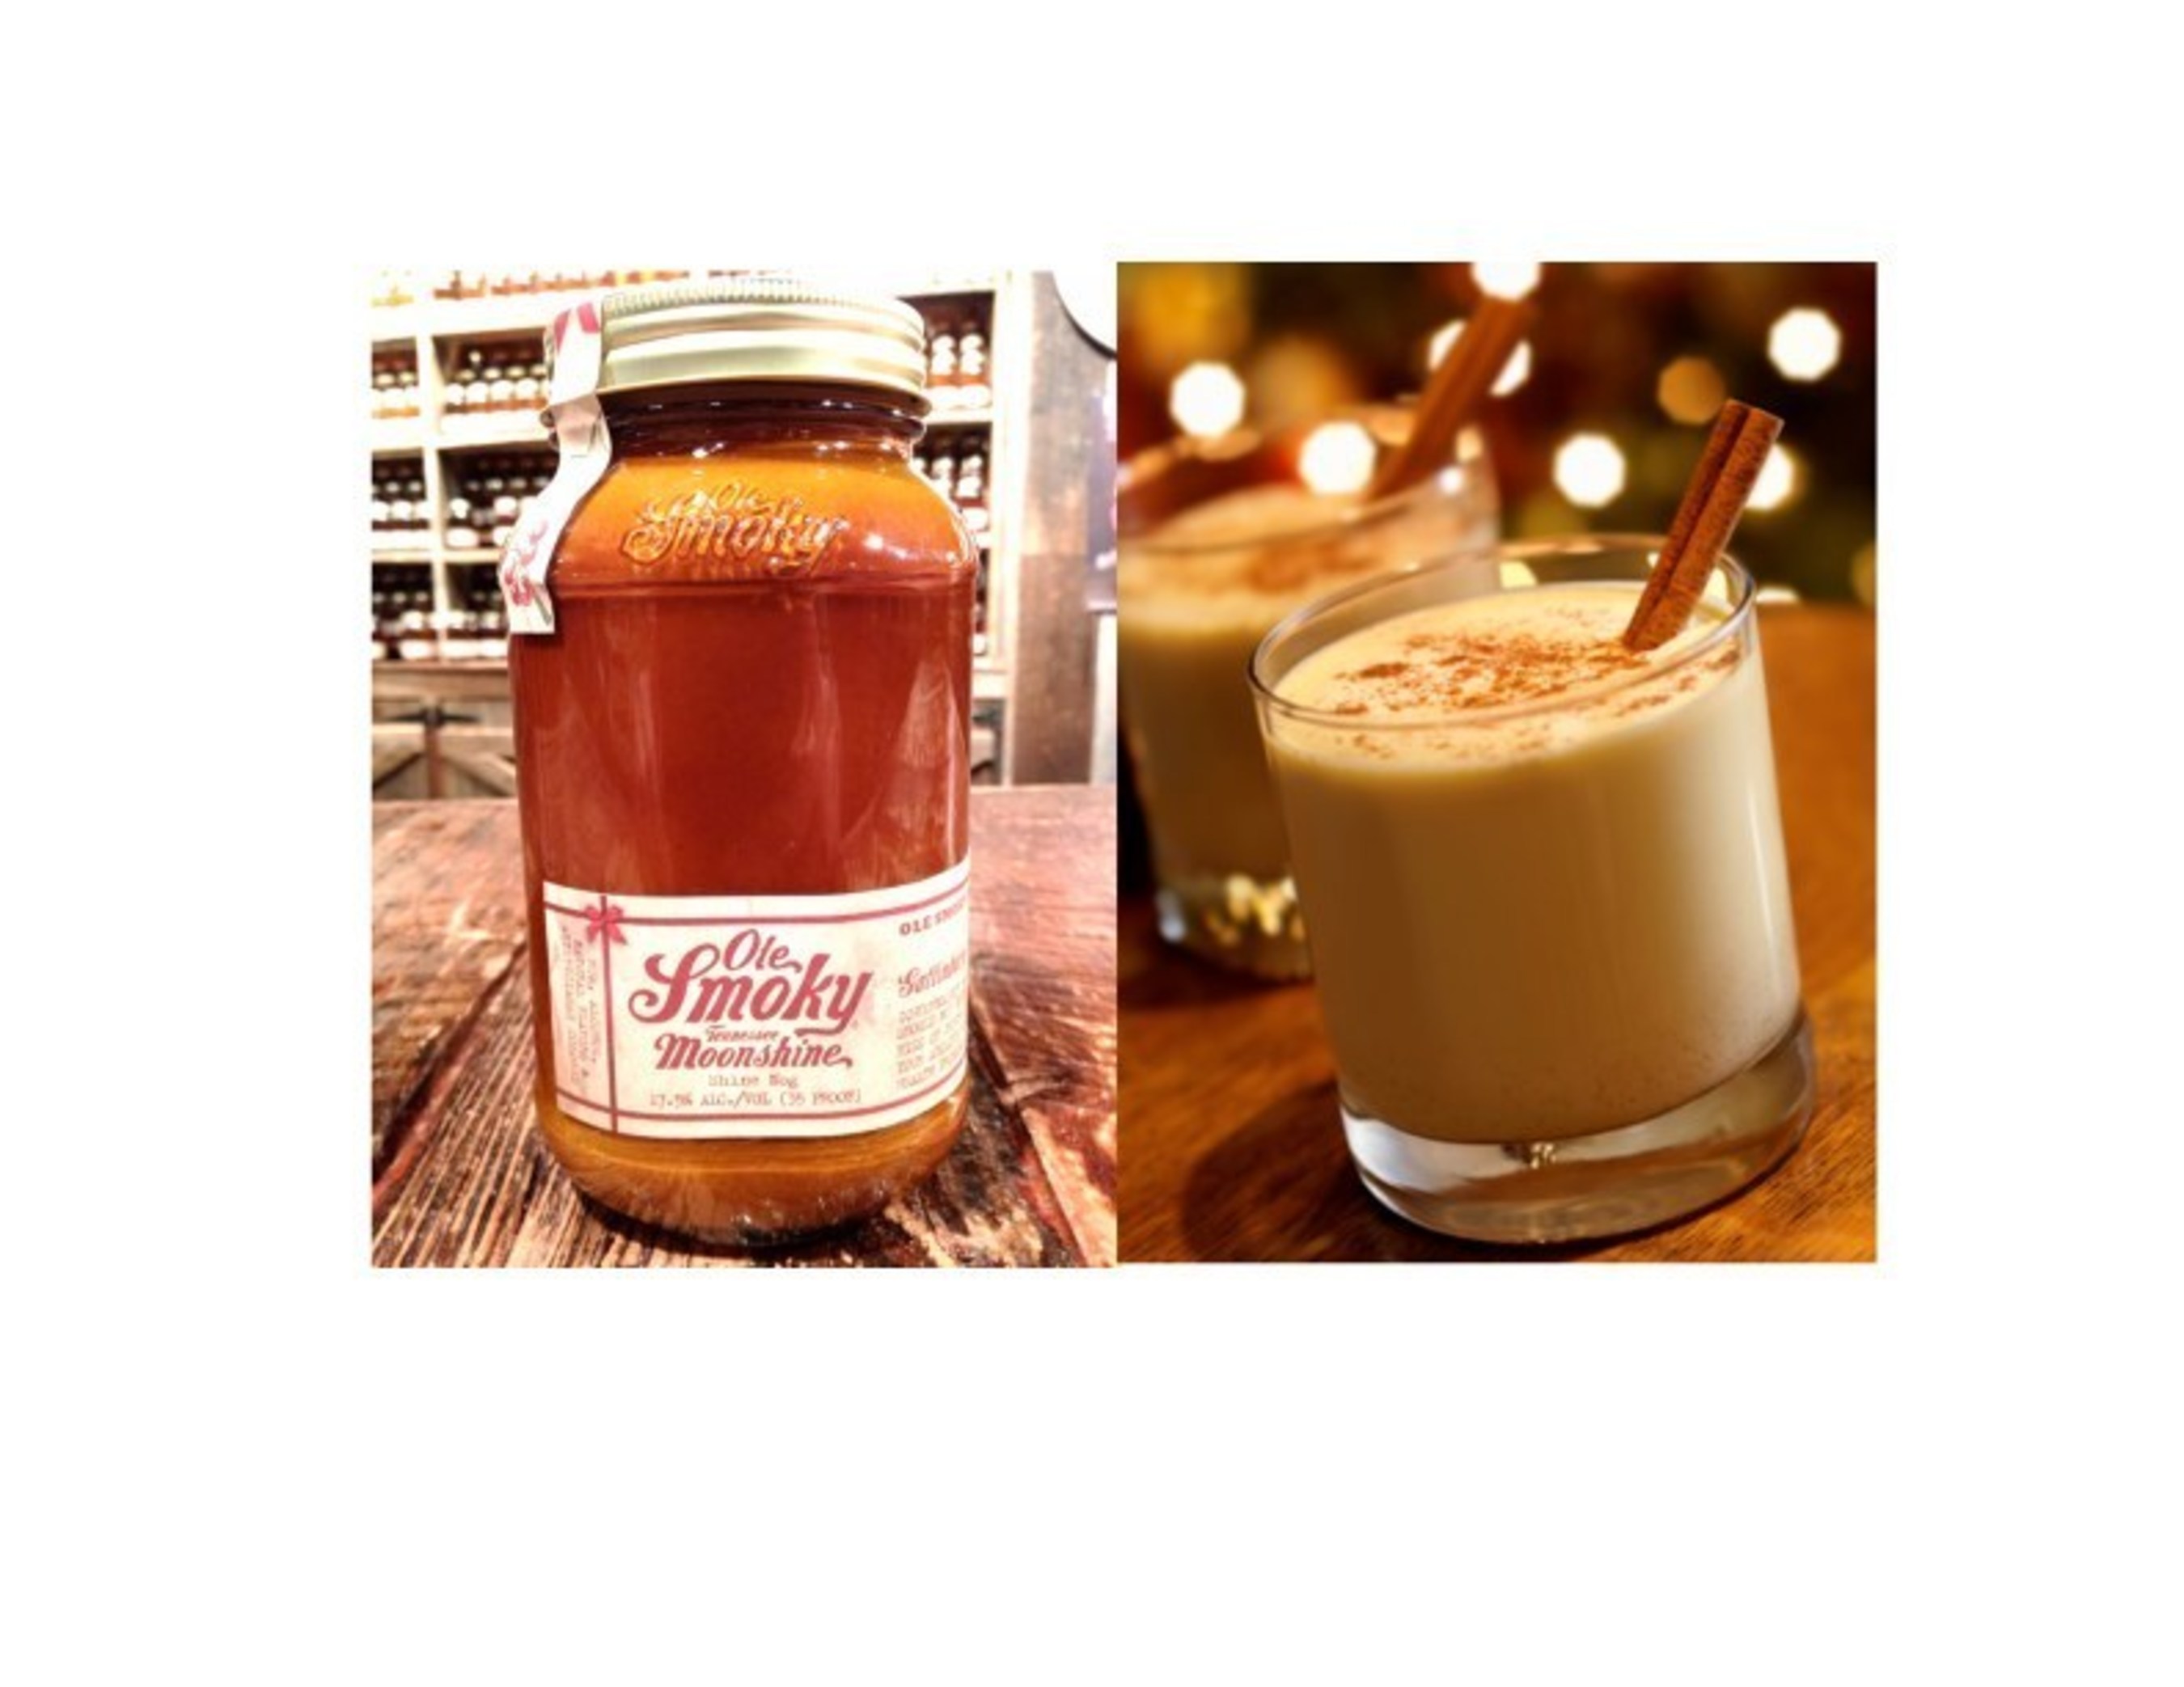 TOP SELLING HOLIDAY FLAVOR SHINE NOG BROUGHT BACK BY OLE SMOKY(R) TENNESSEE MOONSHINE